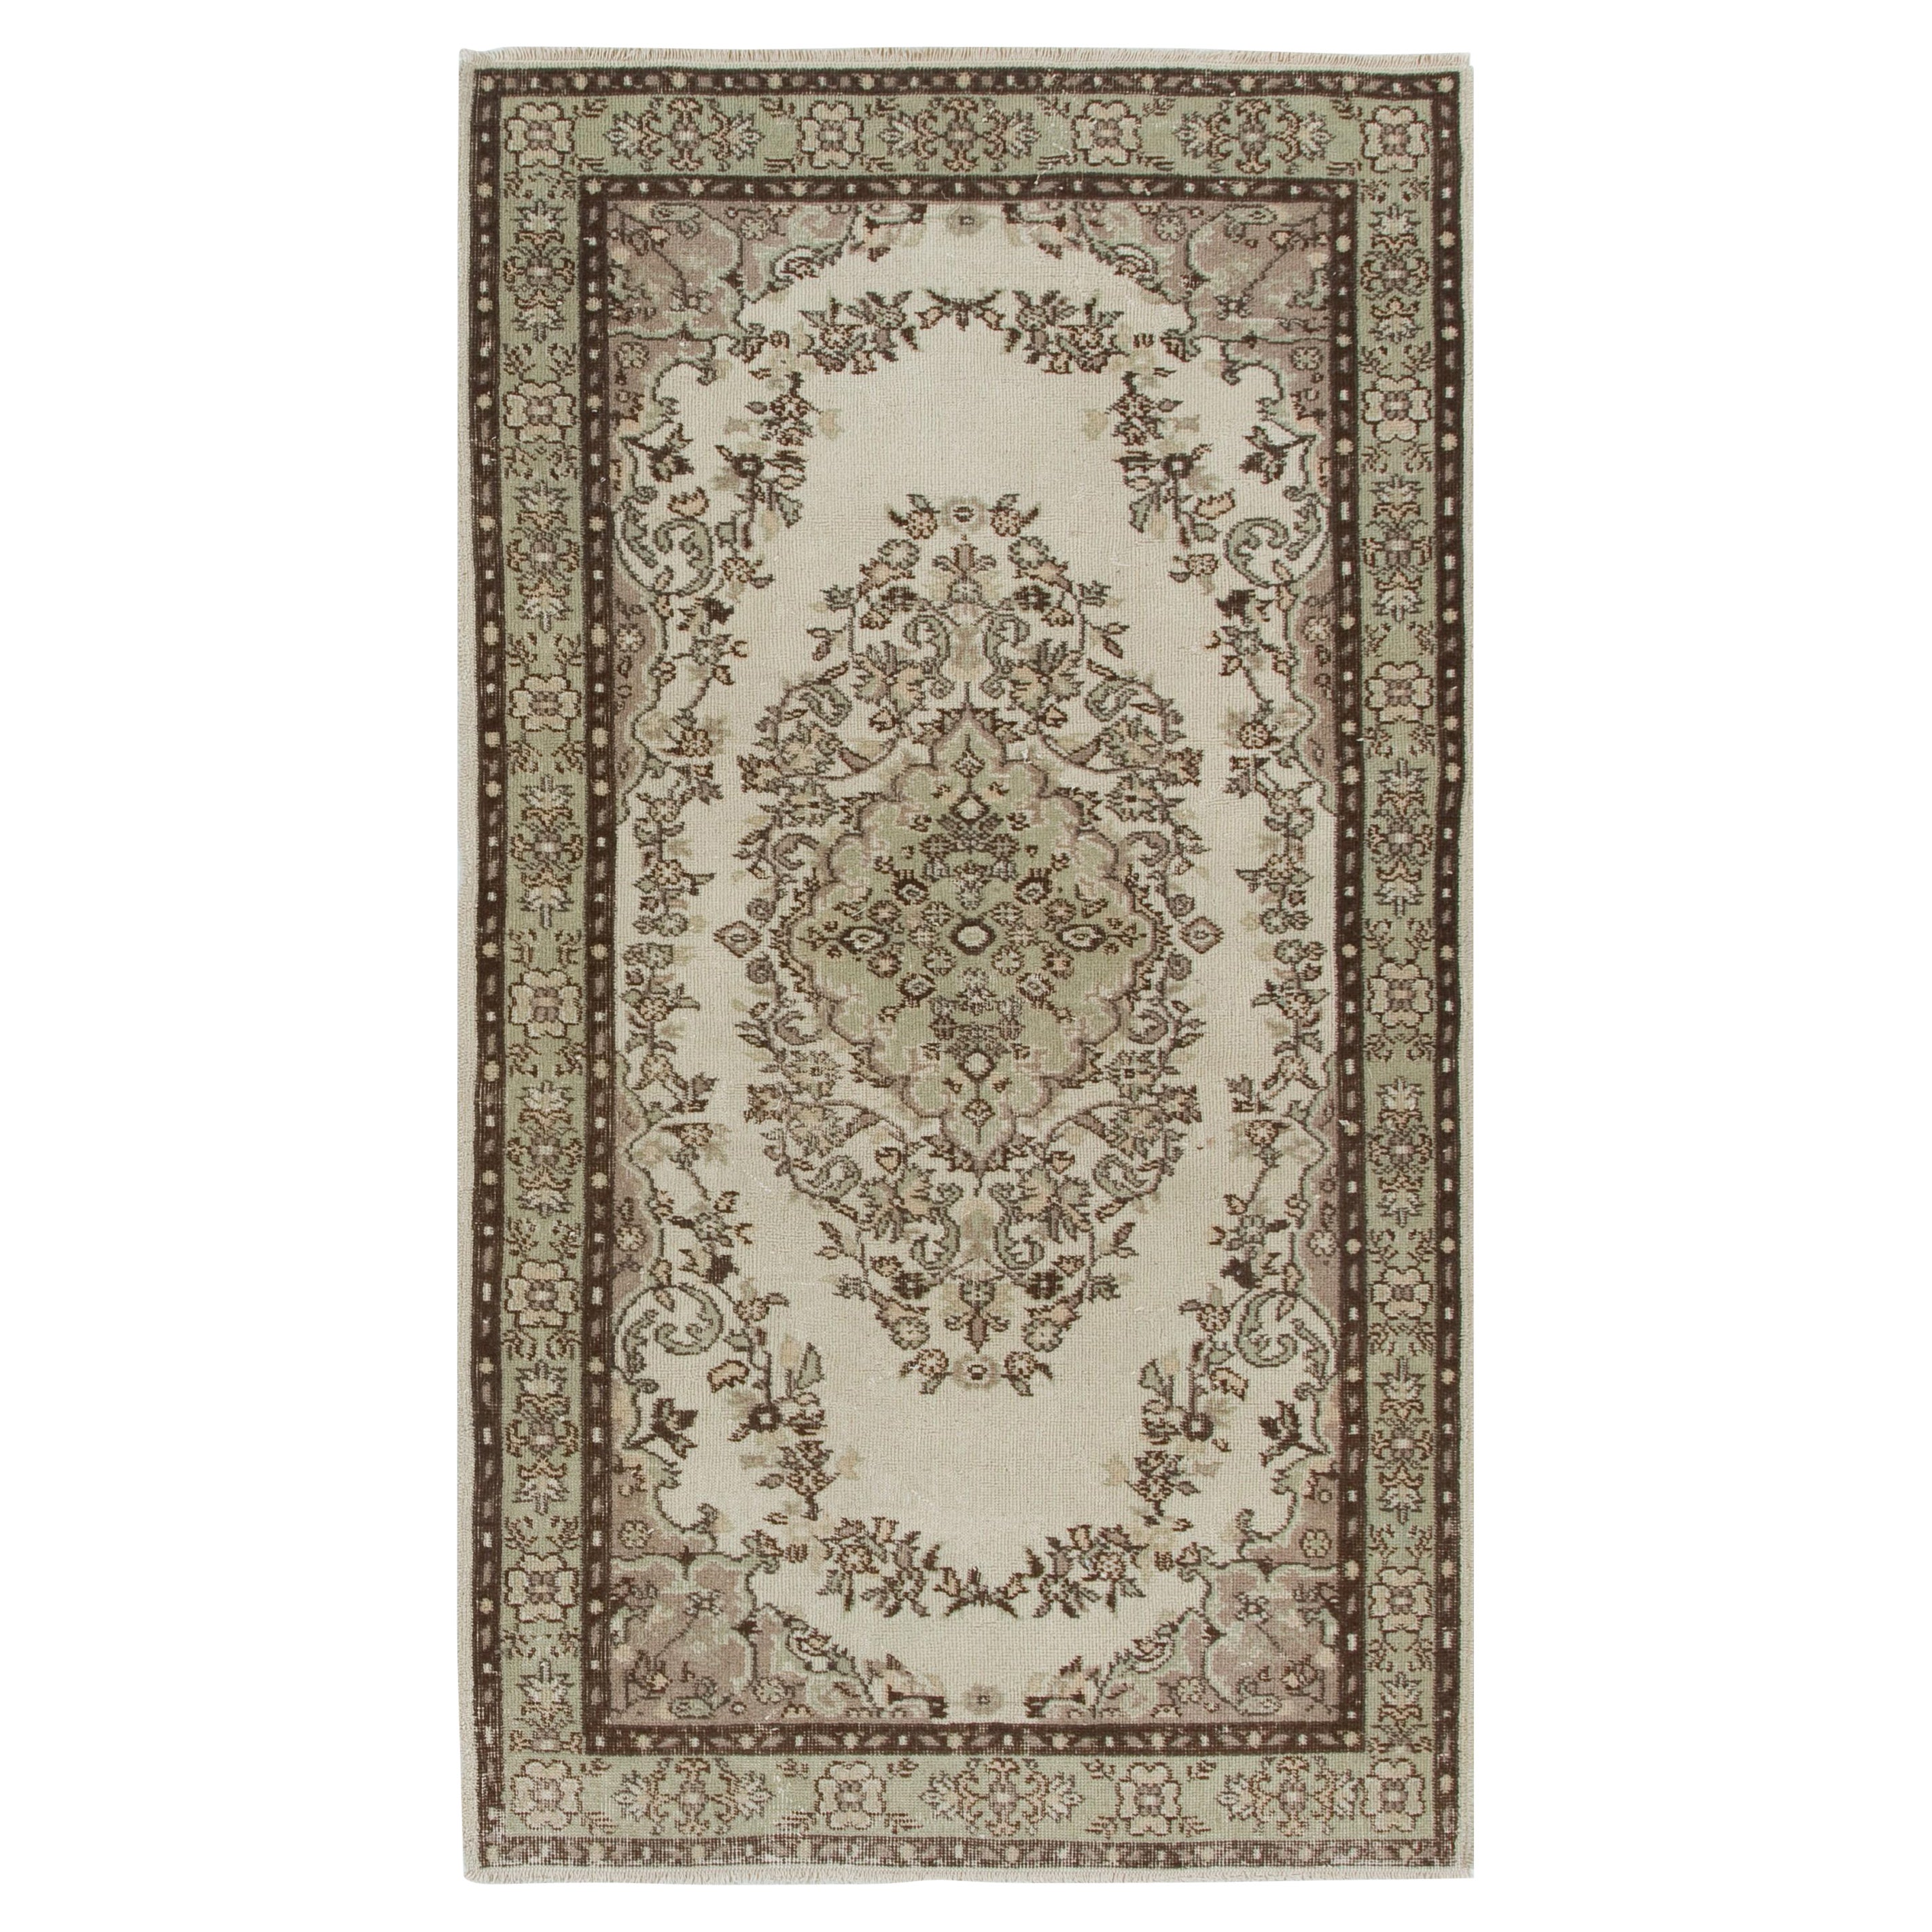 4.2x7.3 Ft Vintage Anatolian Oushak Accent Rug, Ideal for Office and Home Decor